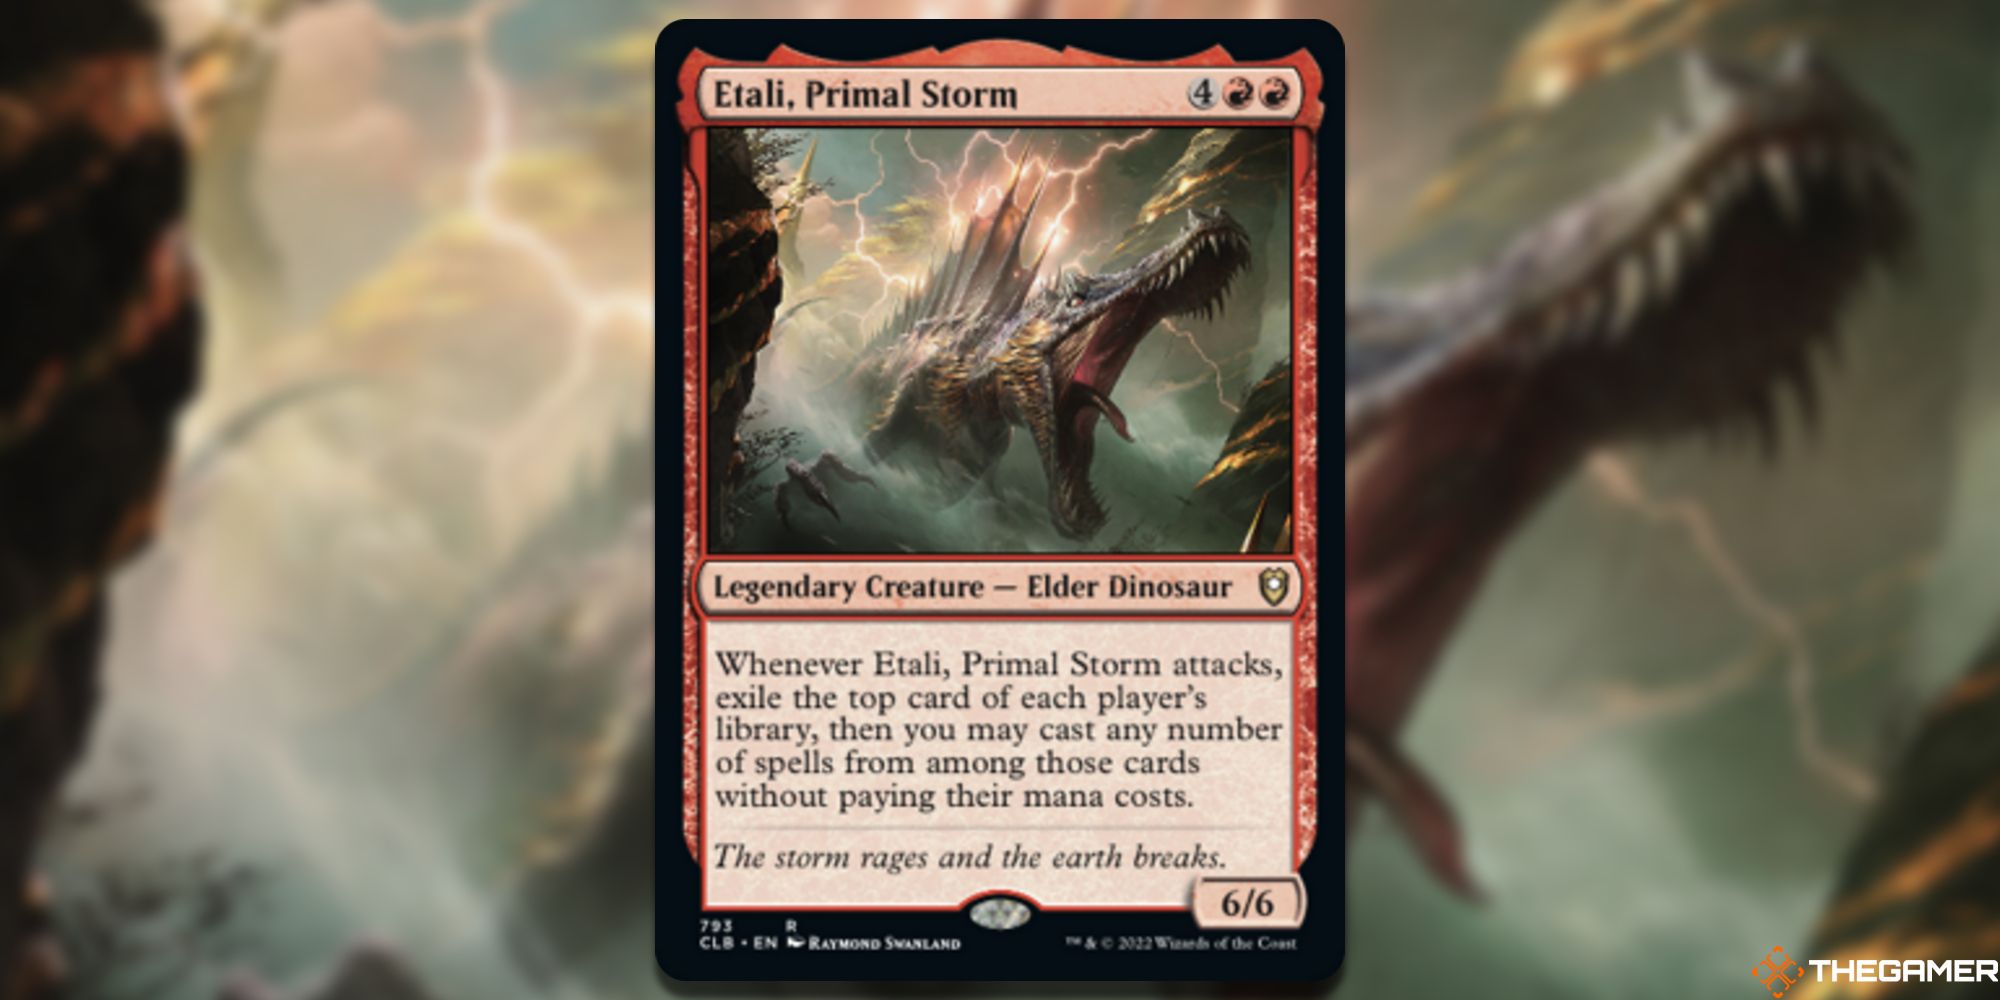 Image of the Etali, Primal Storm Card card in Magic: The Gathering, with art by Raymond Swanland